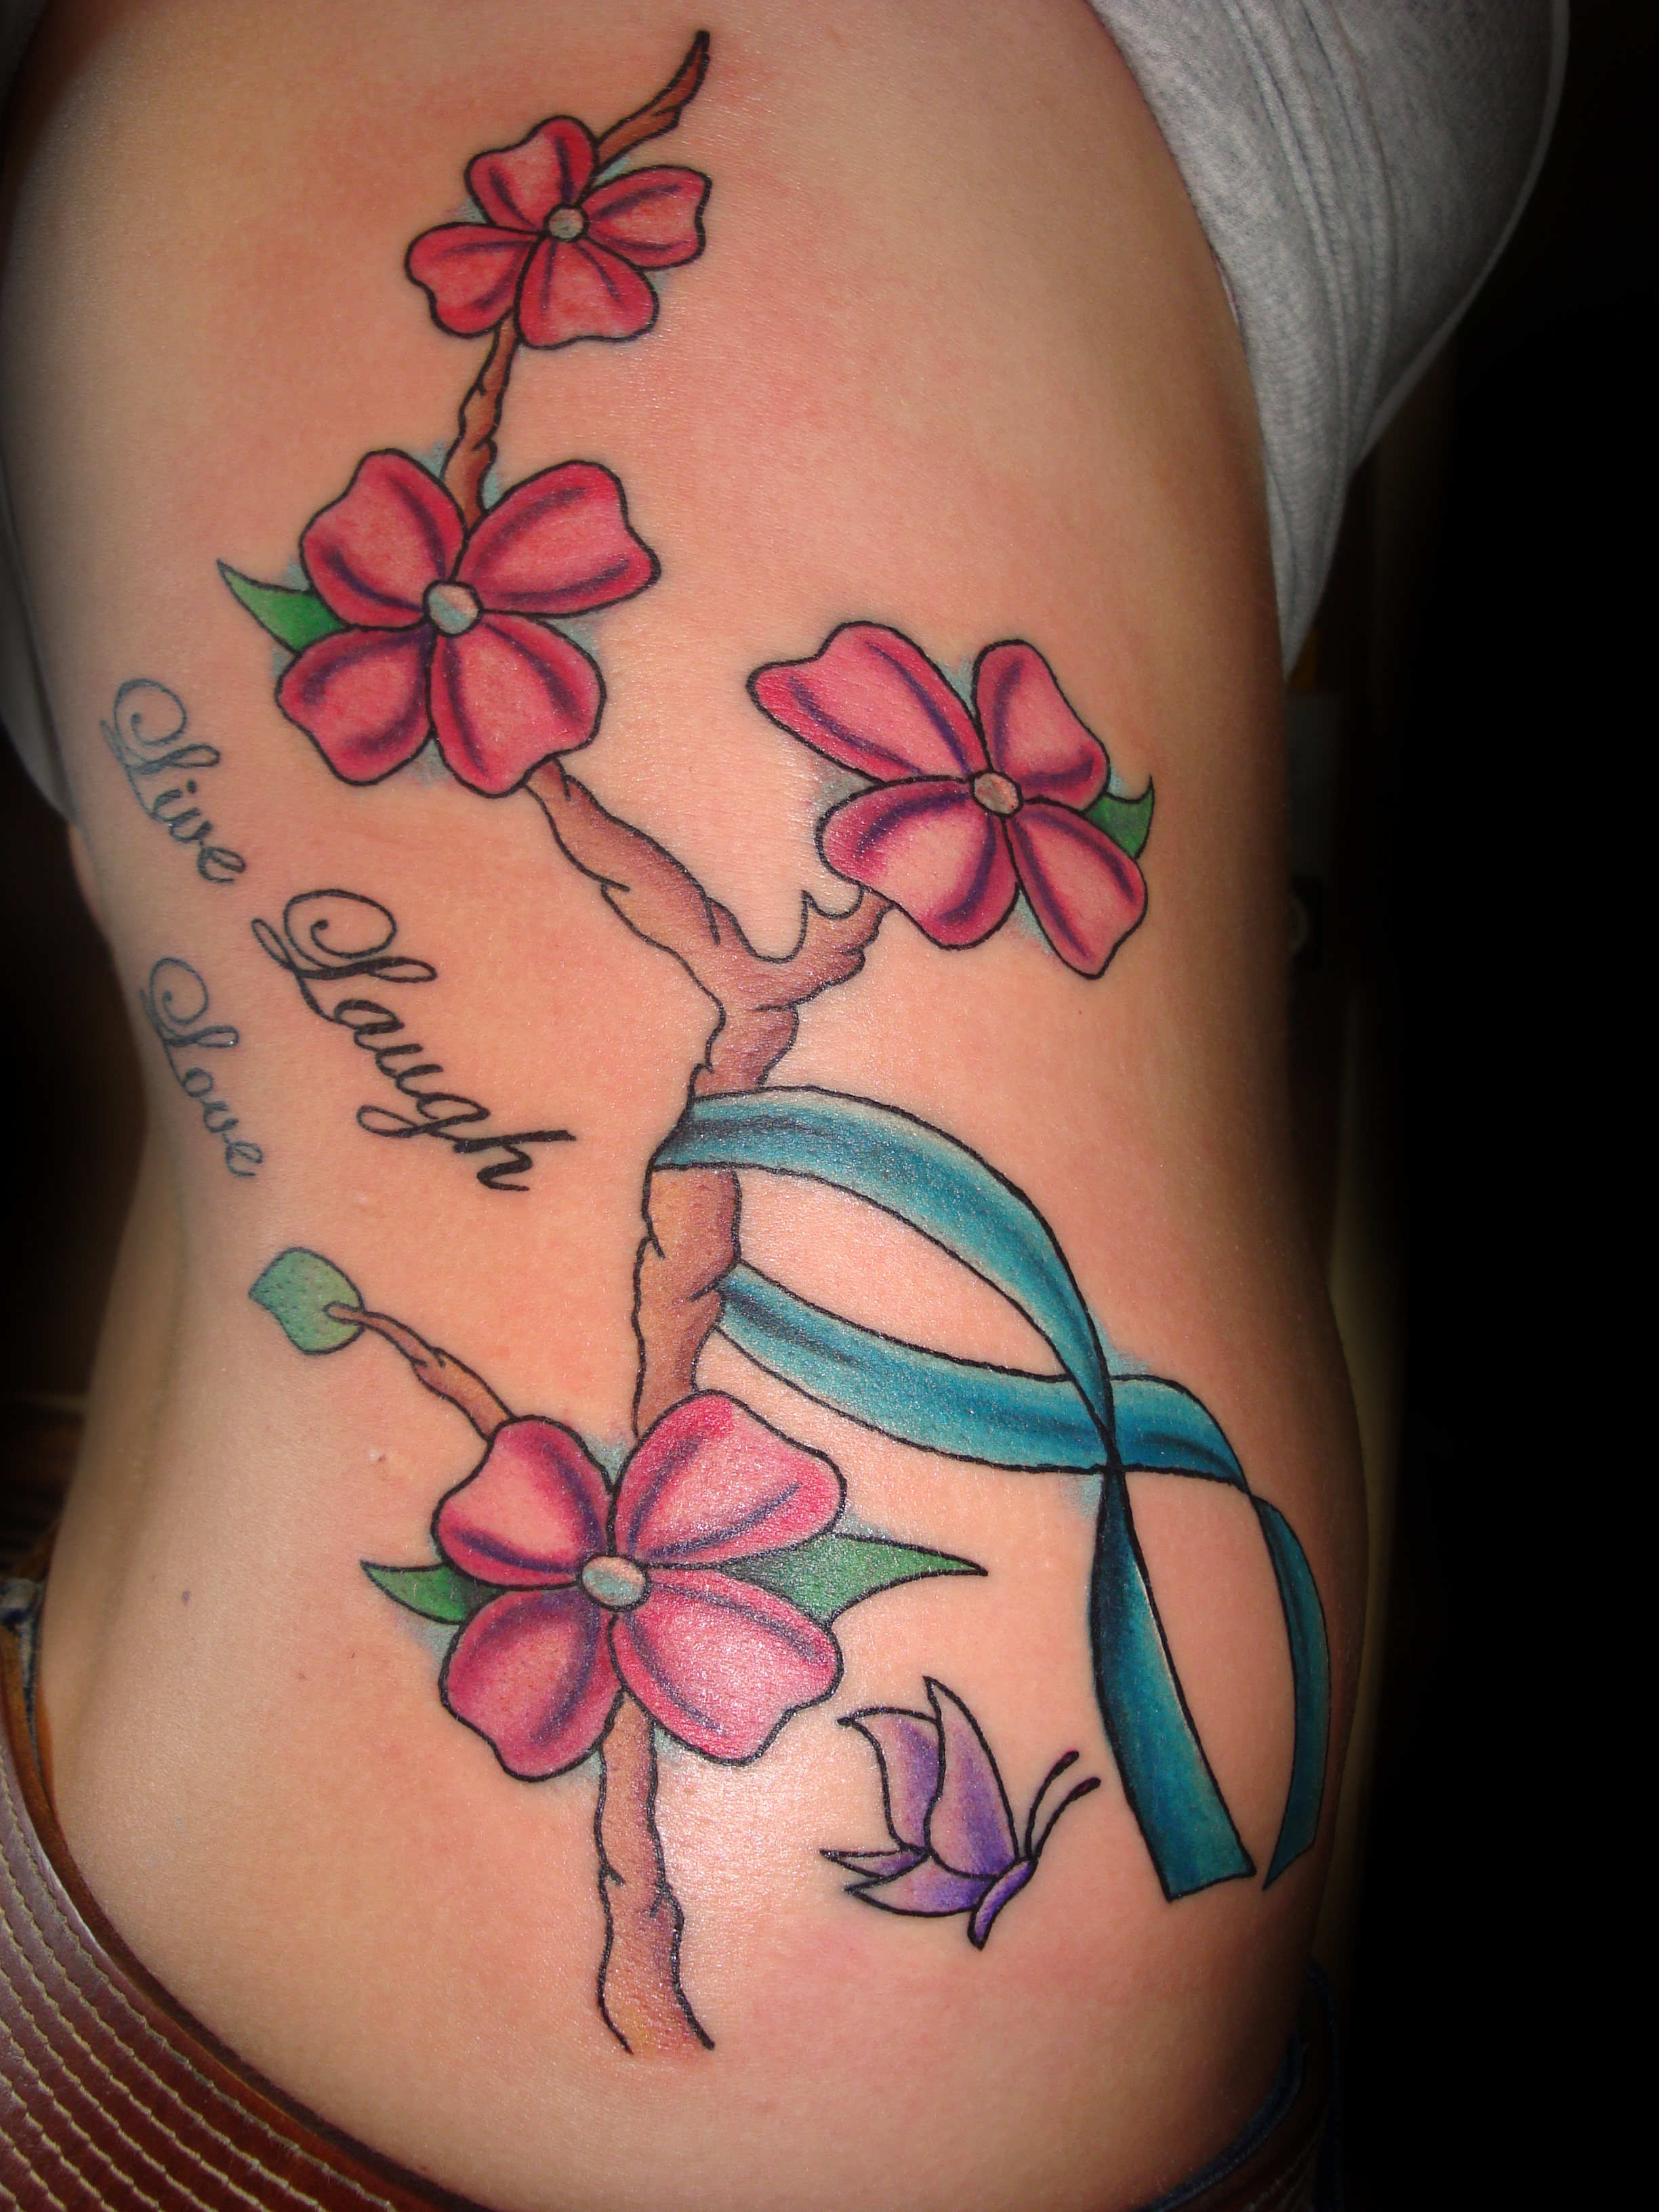 Cancer Ribbon Tattoos with Flowers.